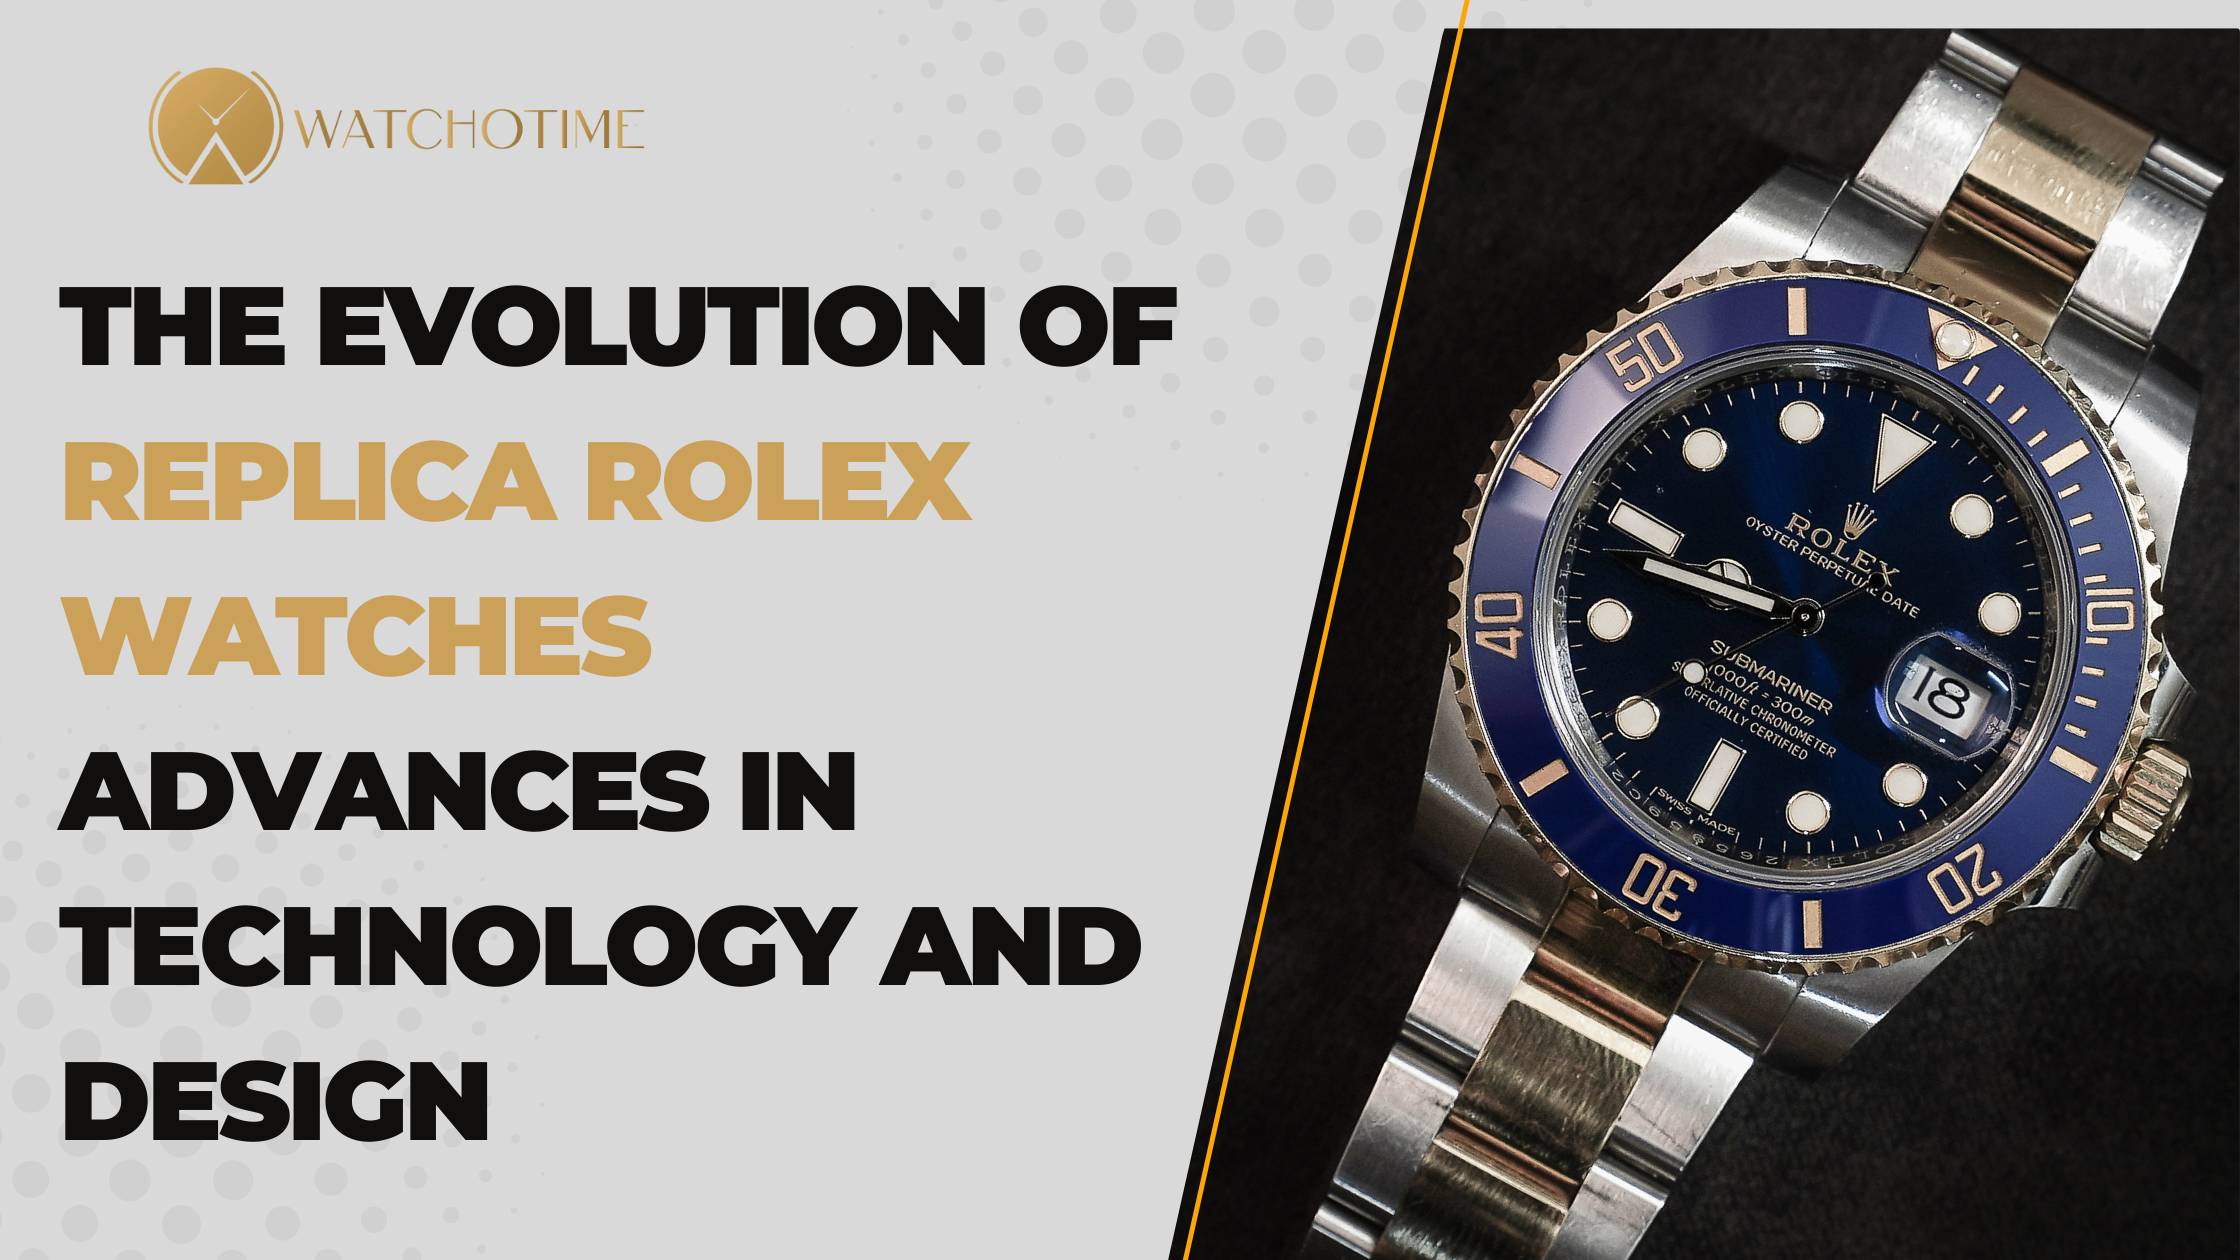 The Evolution of Replica Rolex Watches Advances in Technology and Design